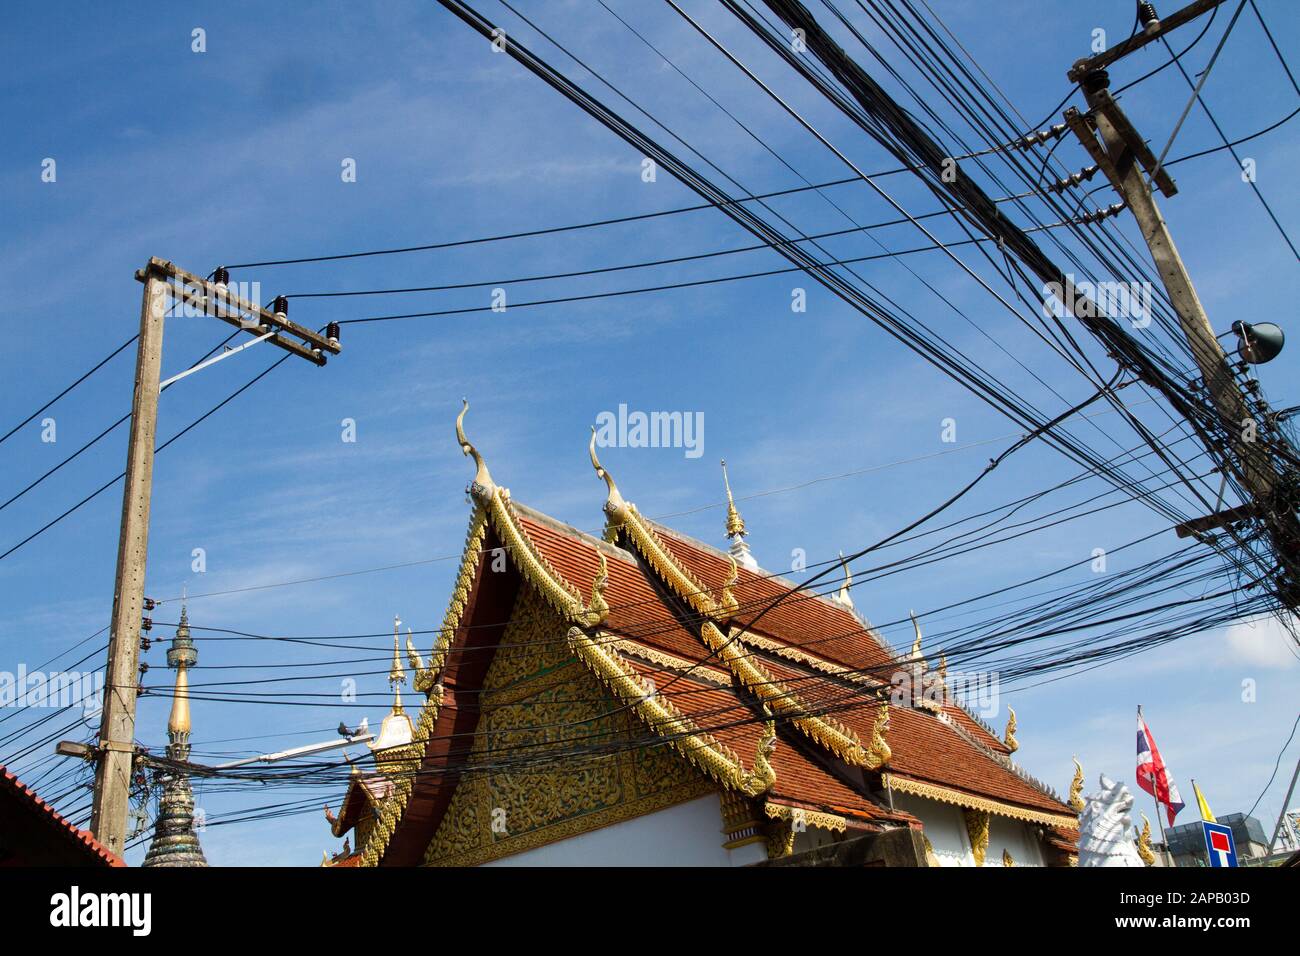 Electrics cables power lines on sky temple Chiang Mai, Thailand Stock Photo